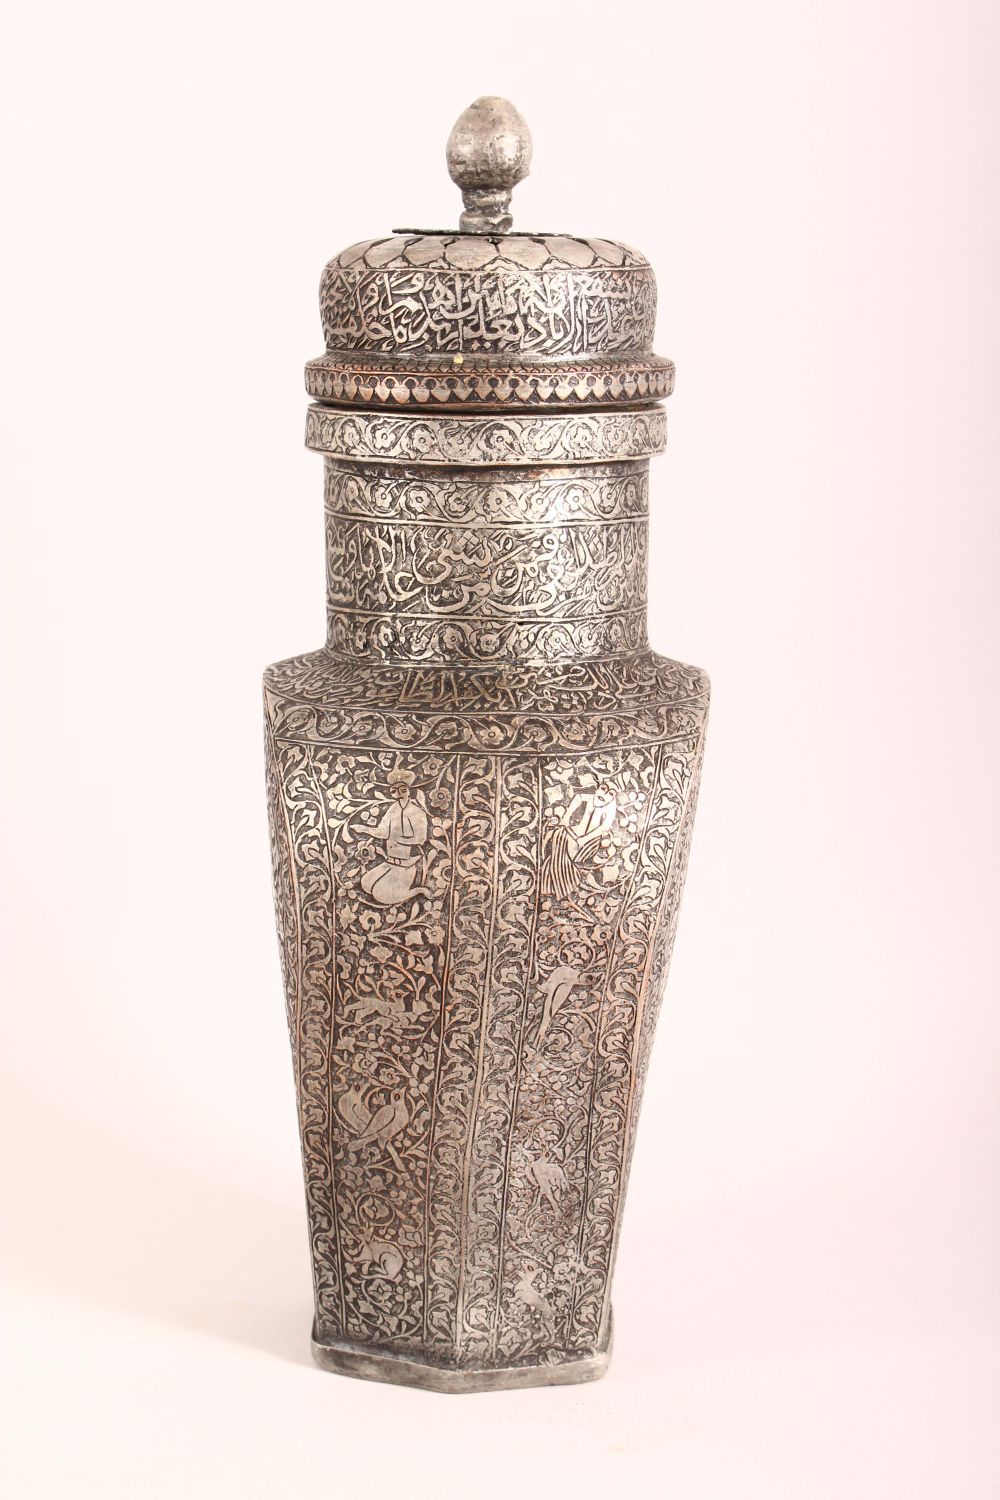 A GOOD PERSIAN TINNED COPPER LIDDED URN - the body carved with figures, animals and flora, with a - Image 4 of 8